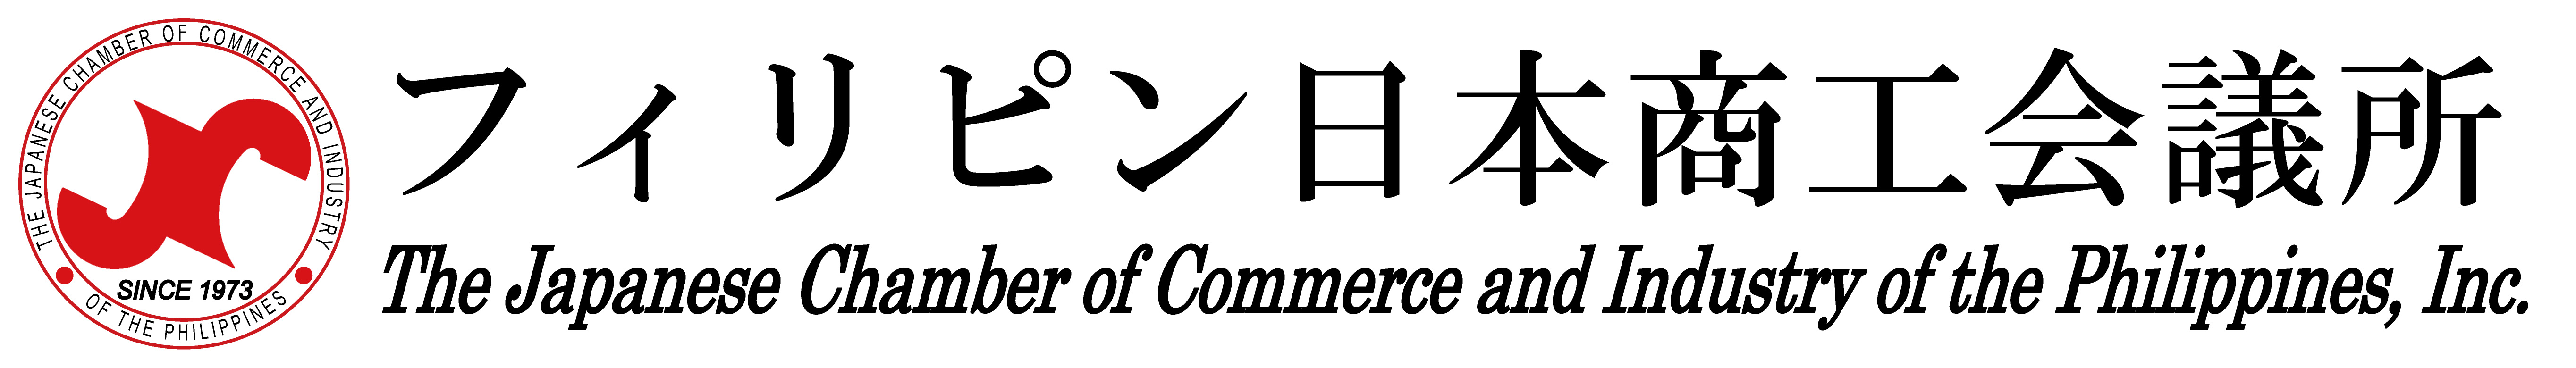 The Japanese Chamber of Commerce and Industry of the Phils., Inc.